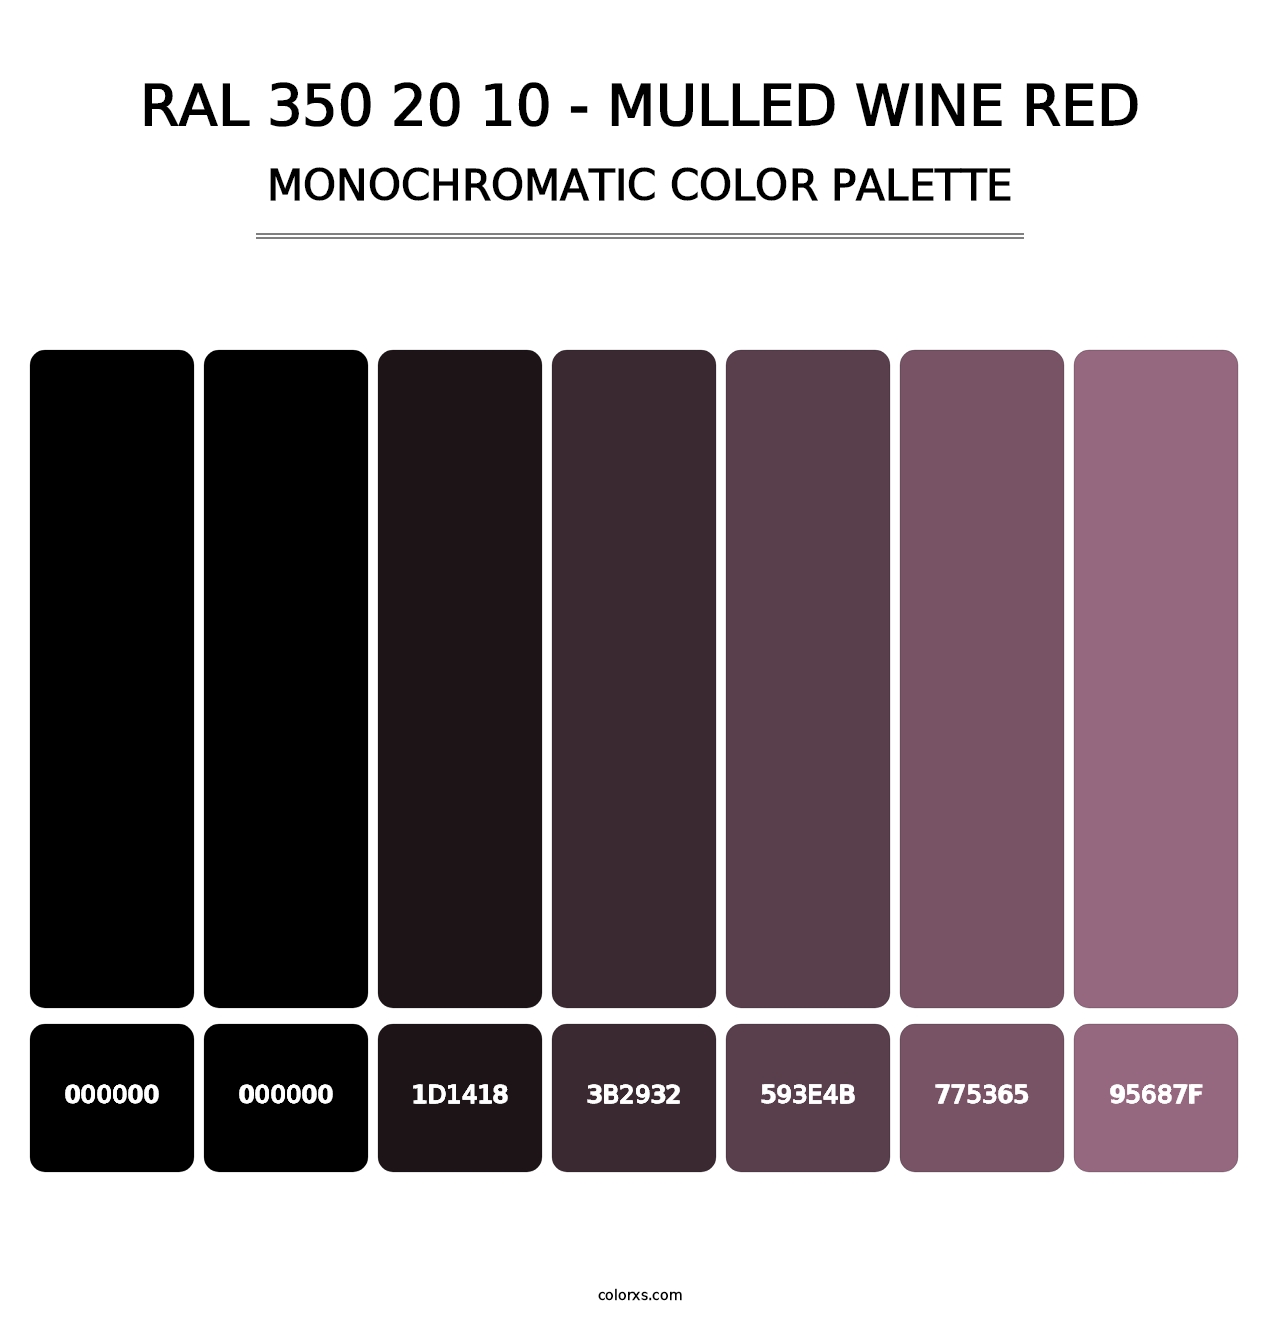 RAL 350 20 10 - Mulled Wine Red - Monochromatic Color Palette